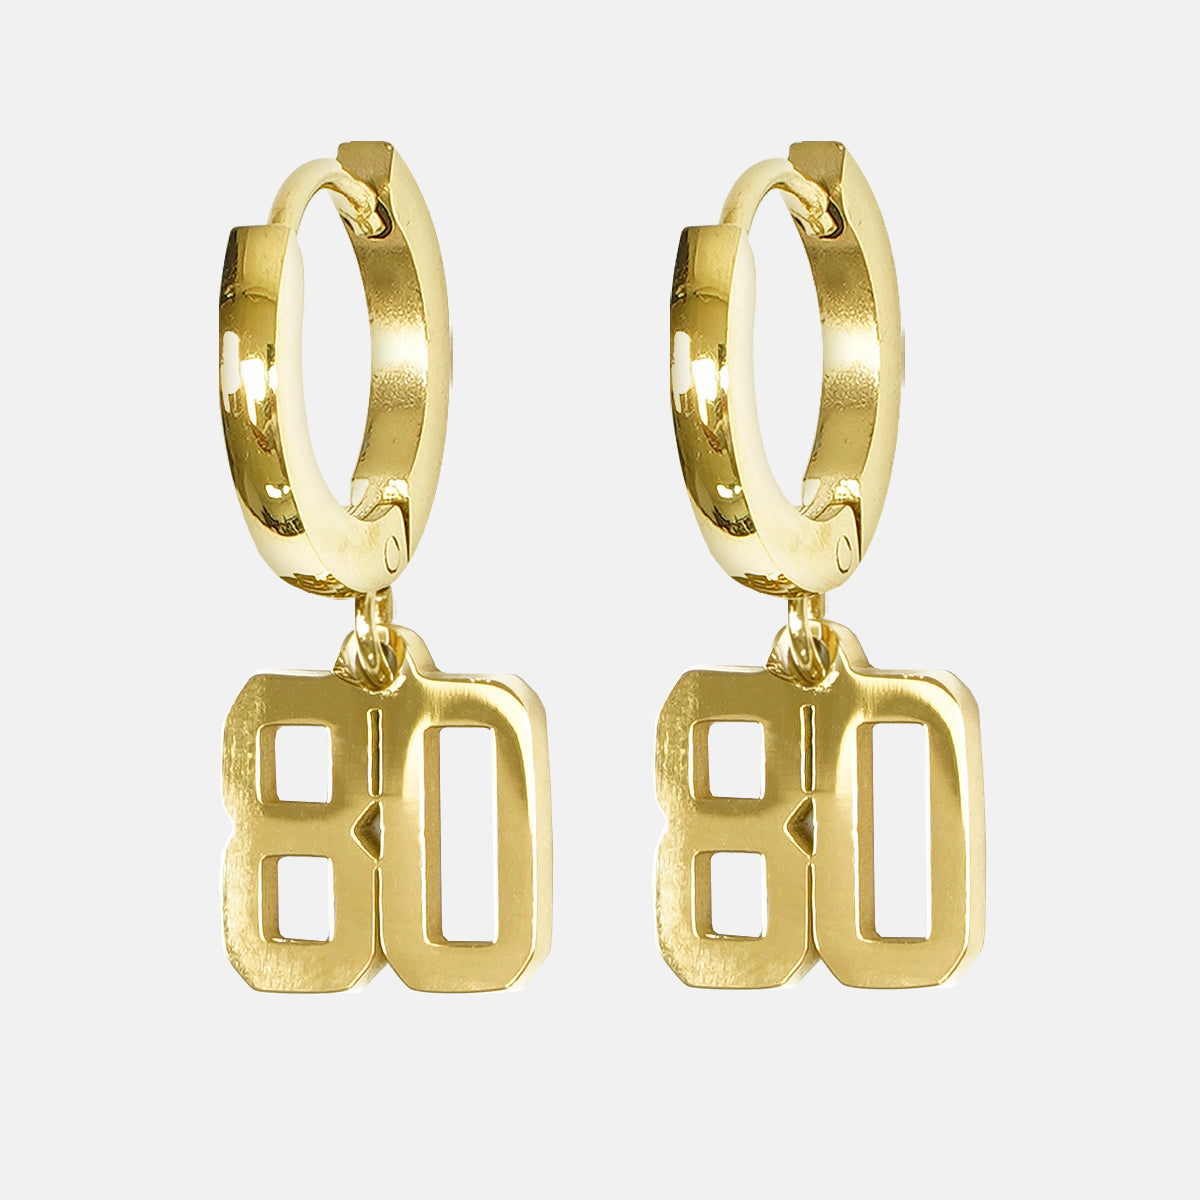 80 Number Earring - Gold Plated Stainless Steel